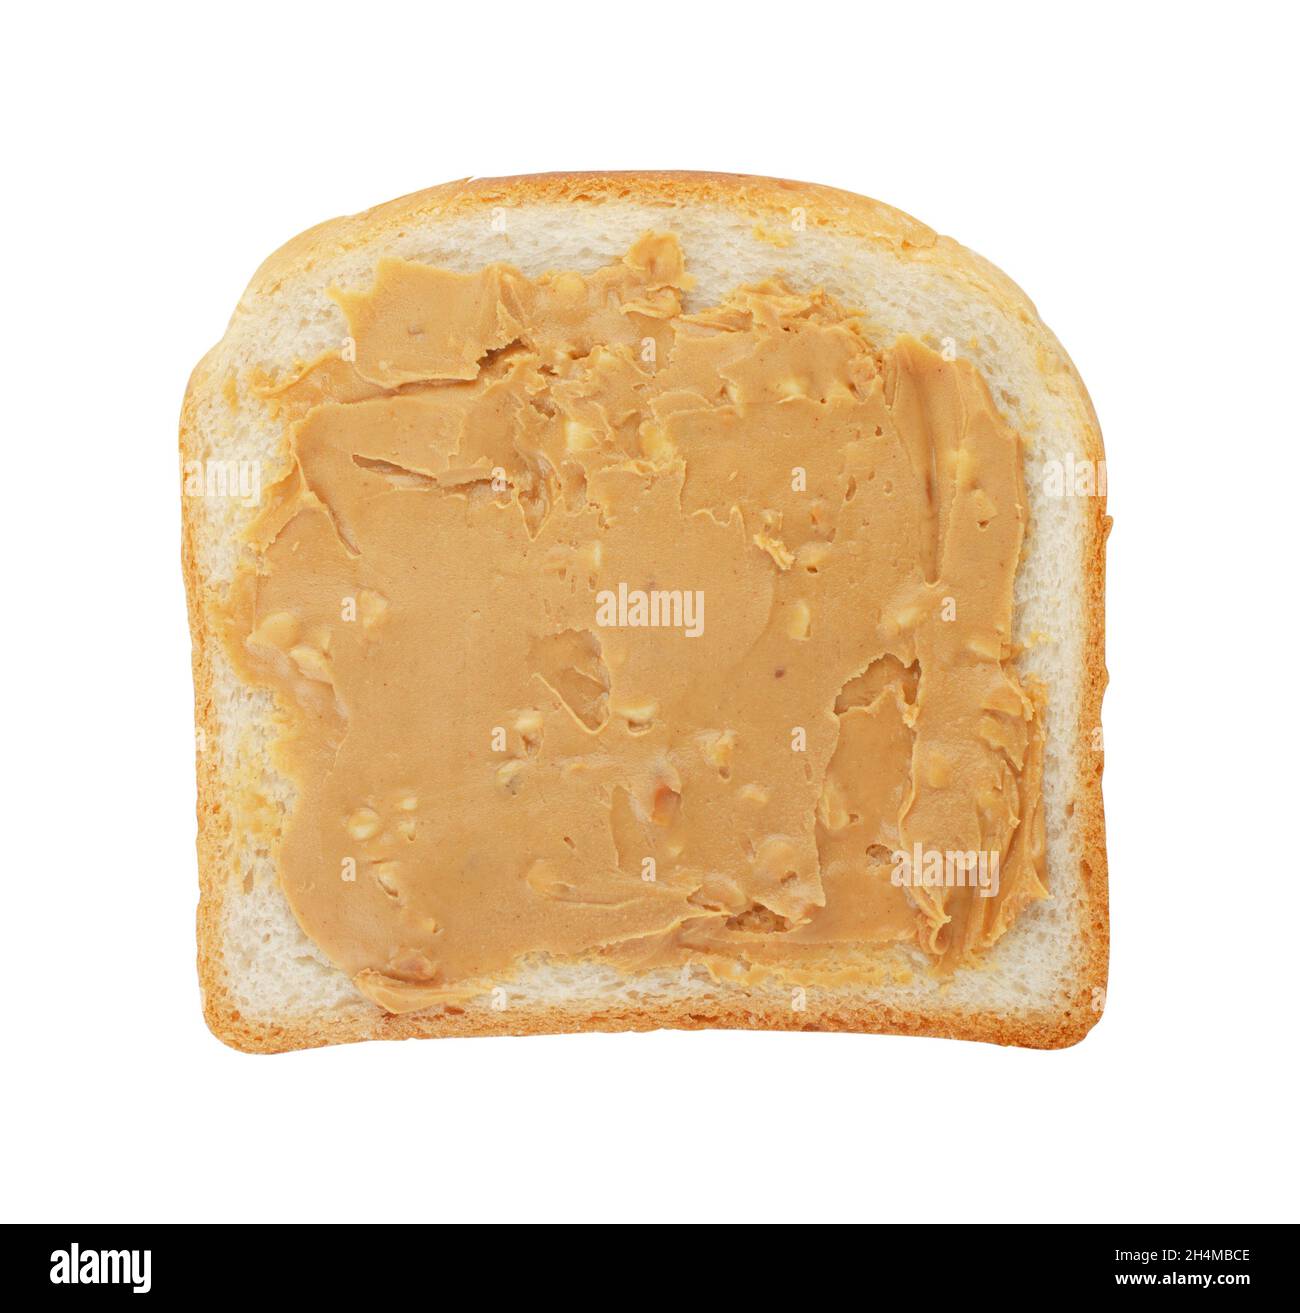 Peanut butter on a slice of toast isolated on a white background Stock Photo